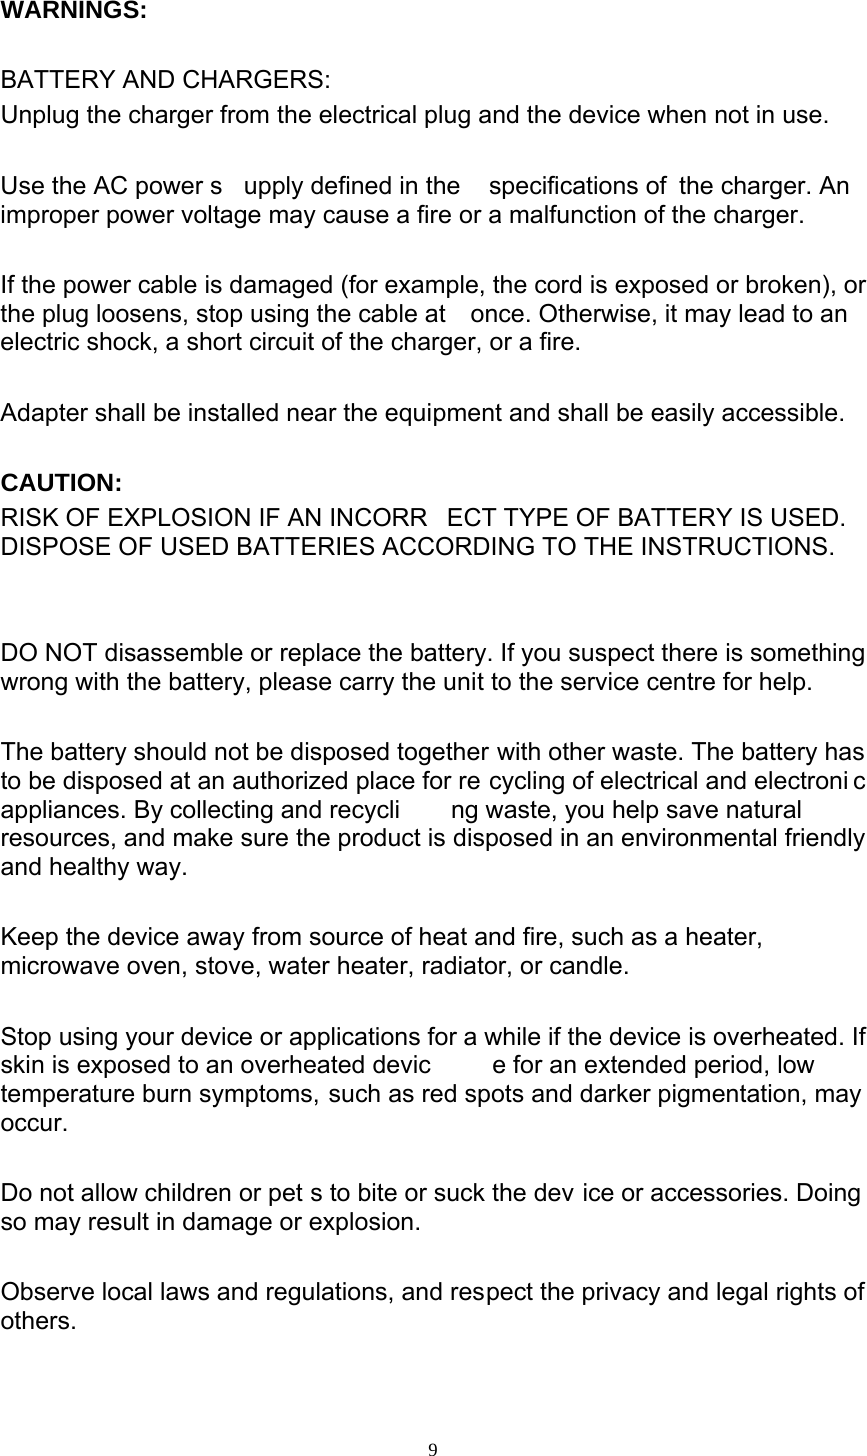  9 WARNINGS:  BATTERY AND CHARGERS: Unplug the charger from the electrical plug and the device when not in use.  Use the AC power s upply defined in the  specifications of  the charger. An improper power voltage may cause a fire or a malfunction of the charger.  If the power cable is damaged (for example, the cord is exposed or broken), or the plug loosens, stop using the cable at  once. Otherwise, it may lead to an electric shock, a short circuit of the charger, or a fire.  Adapter shall be installed near the equipment and shall be easily accessible.  CAUTION:  RISK OF EXPLOSION IF AN INCORR ECT TYPE OF BATTERY IS USED.  DISPOSE OF USED BATTERIES ACCORDING TO THE INSTRUCTIONS.   DO NOT disassemble or replace the battery. If you suspect there is something wrong with the battery, please carry the unit to the service centre for help.  The battery should not be disposed together with other waste. The battery has to be disposed at an authorized place for re cycling of electrical and electroni c appliances. By collecting and recycli ng waste, you help save natural resources, and make sure the product is disposed in an environmental friendly and healthy way.  Keep the device away from source of heat and fire, such as a heater, microwave oven, stove, water heater, radiator, or candle.  Stop using your device or applications for a while if the device is overheated. If       skin is exposed to an overheated devic e for an extended period, low     temperature burn symptoms, such as red spots and darker pigmentation, may       occur.  Do not allow children or pet s to bite or suck the dev ice or accessories. Doing so may result in damage or explosion.  Observe local laws and regulations, and respect the privacy and legal rights of       others.   